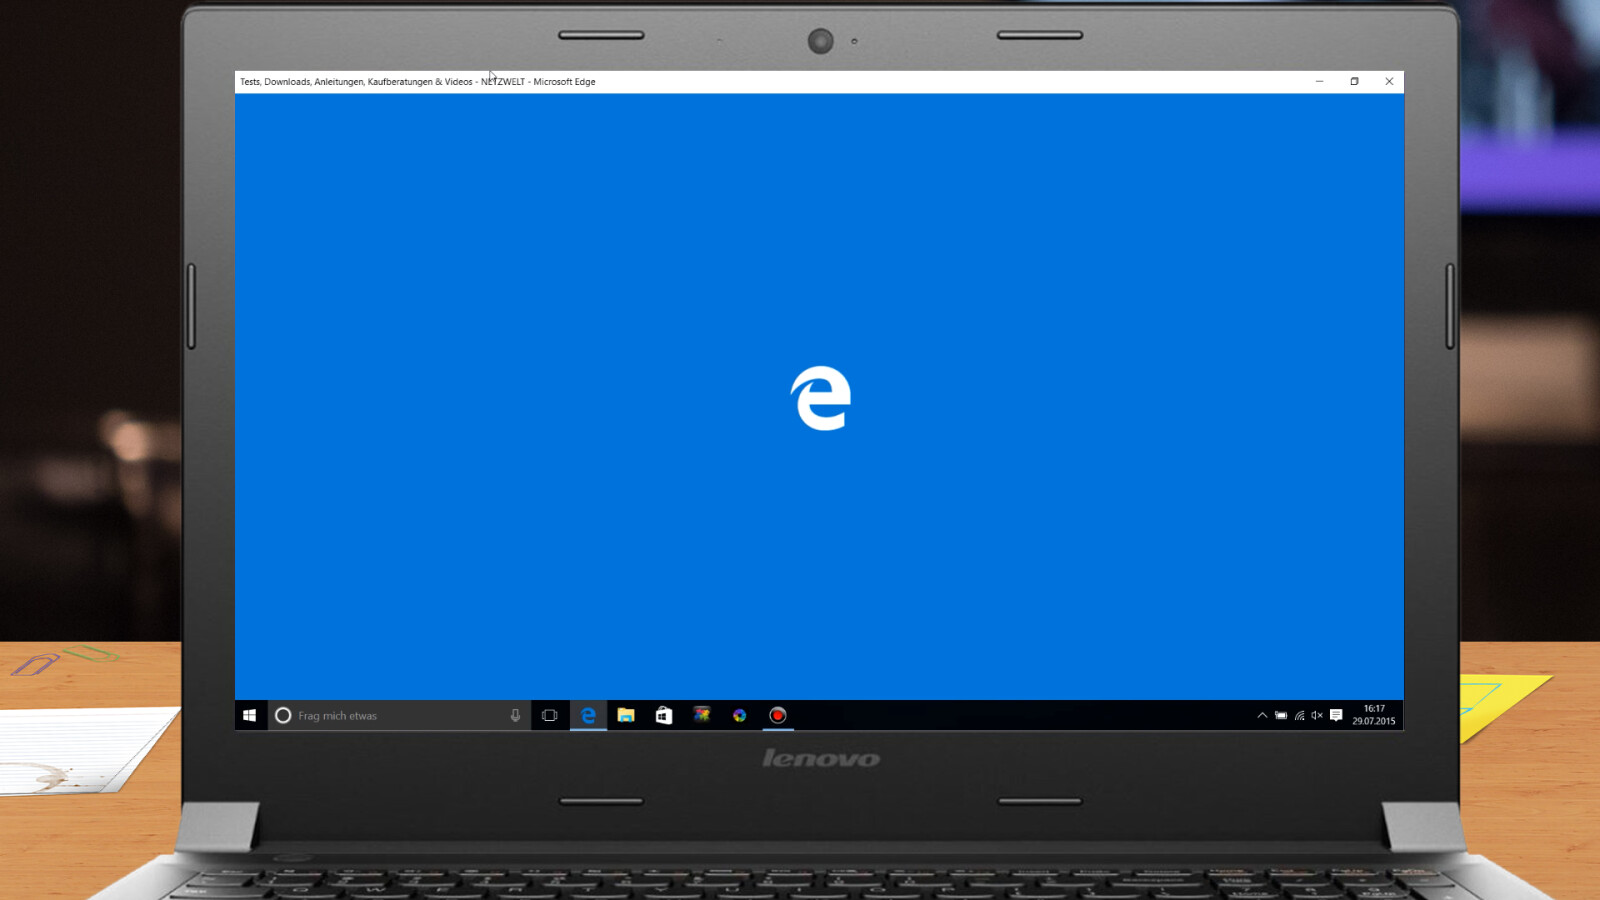 microsoft edge for windows 7 64 bit free download from p30download